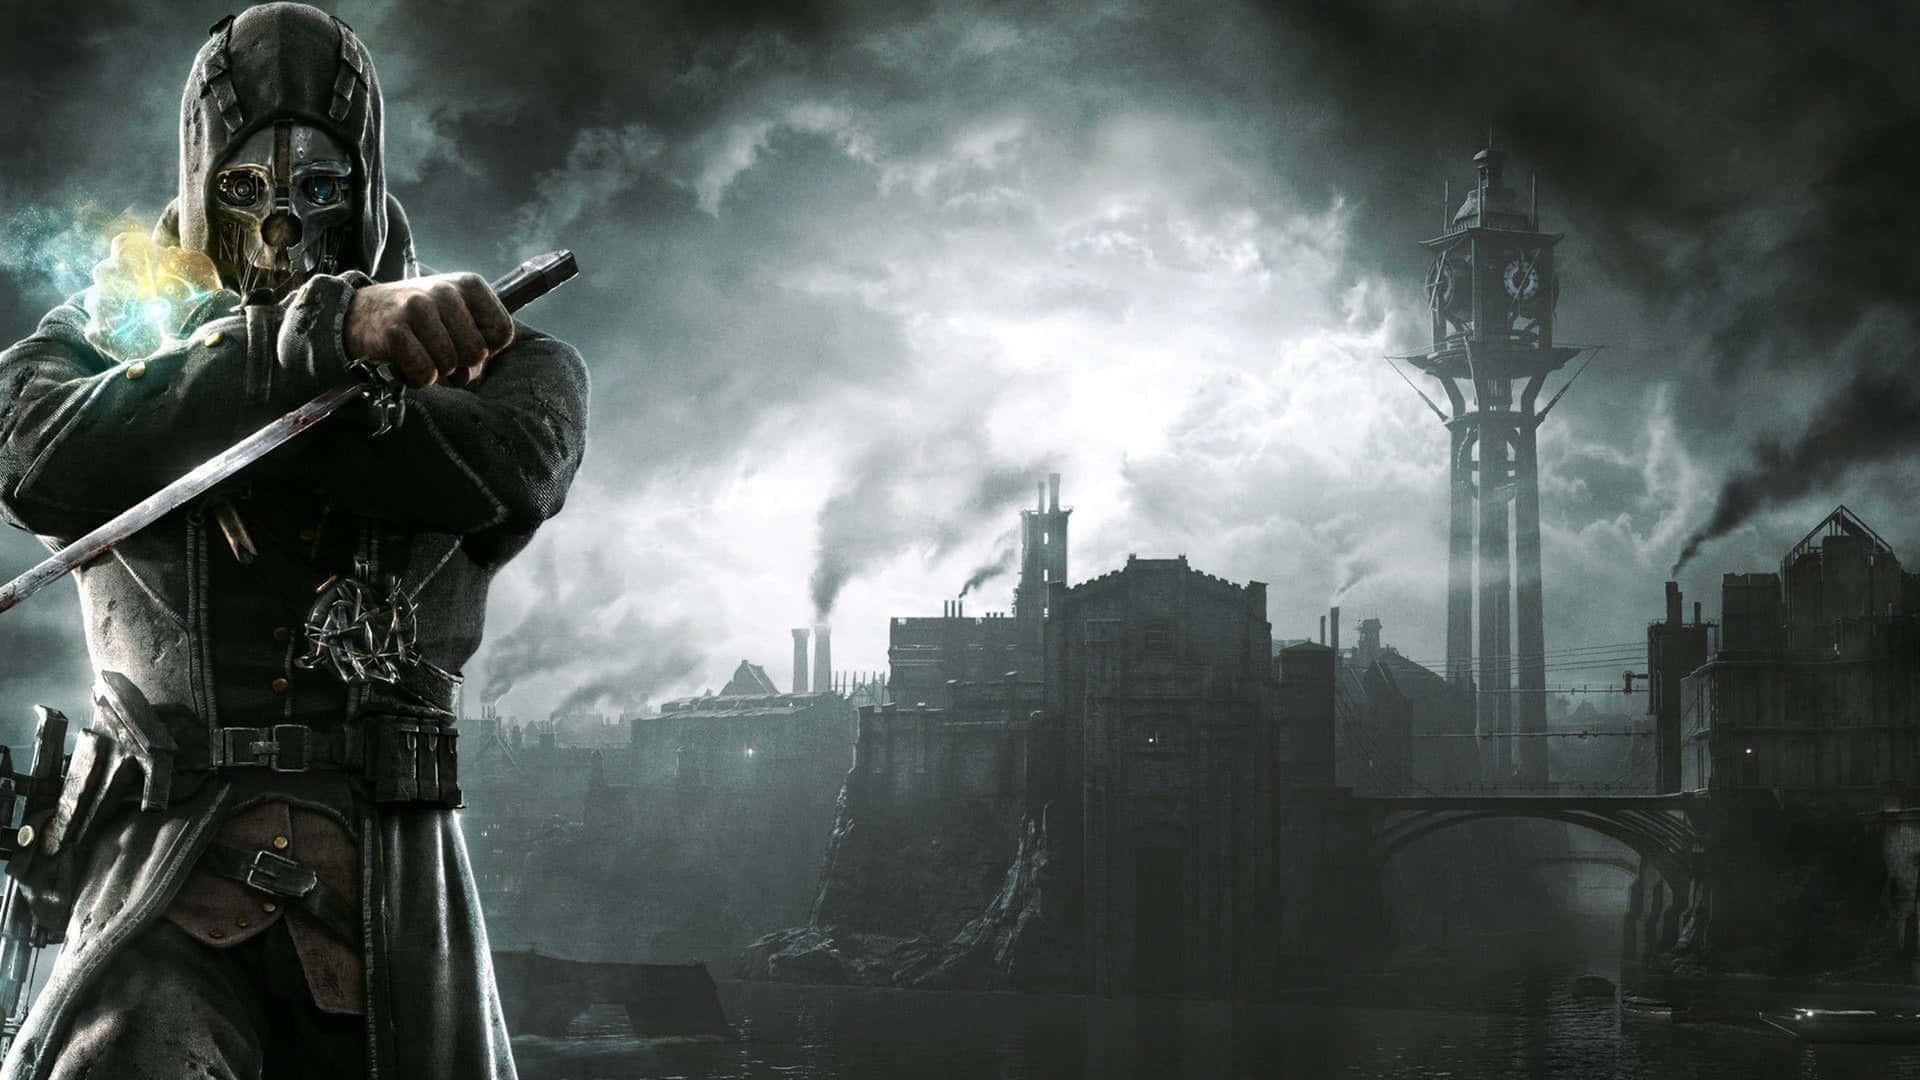 Step into the fantasy world of Dishonored Wallpaper